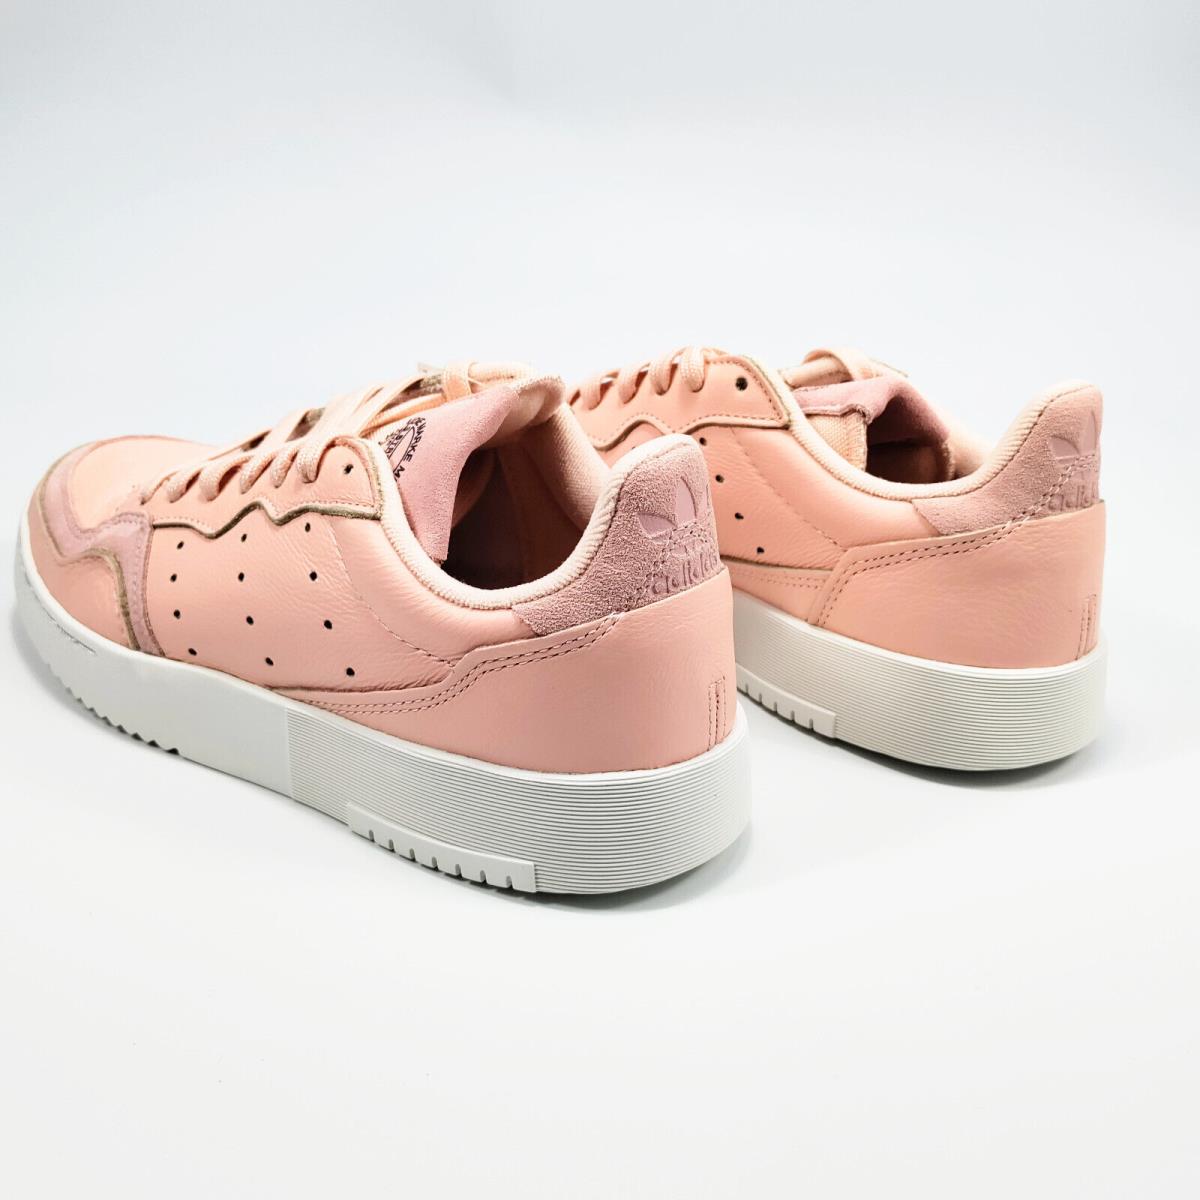 Adidas shoes Revolution Racer - Pink 7